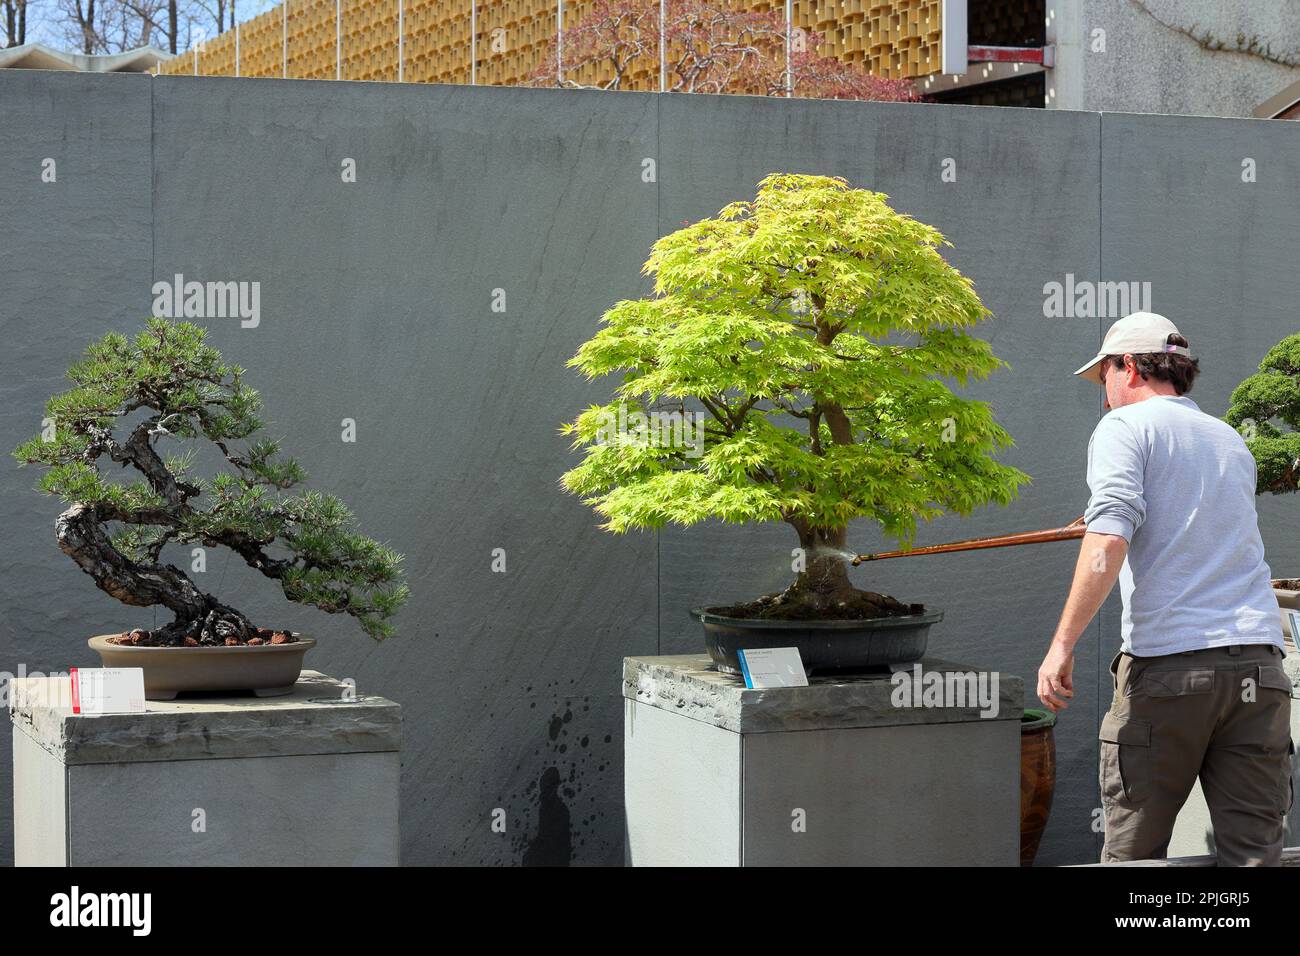 A worker waters a dwarf Japanese maple bonsai (Acer palmatum) at the National Bonsai and Penjing Museum at the US National Arboretum, Washington DC. Stock Photo